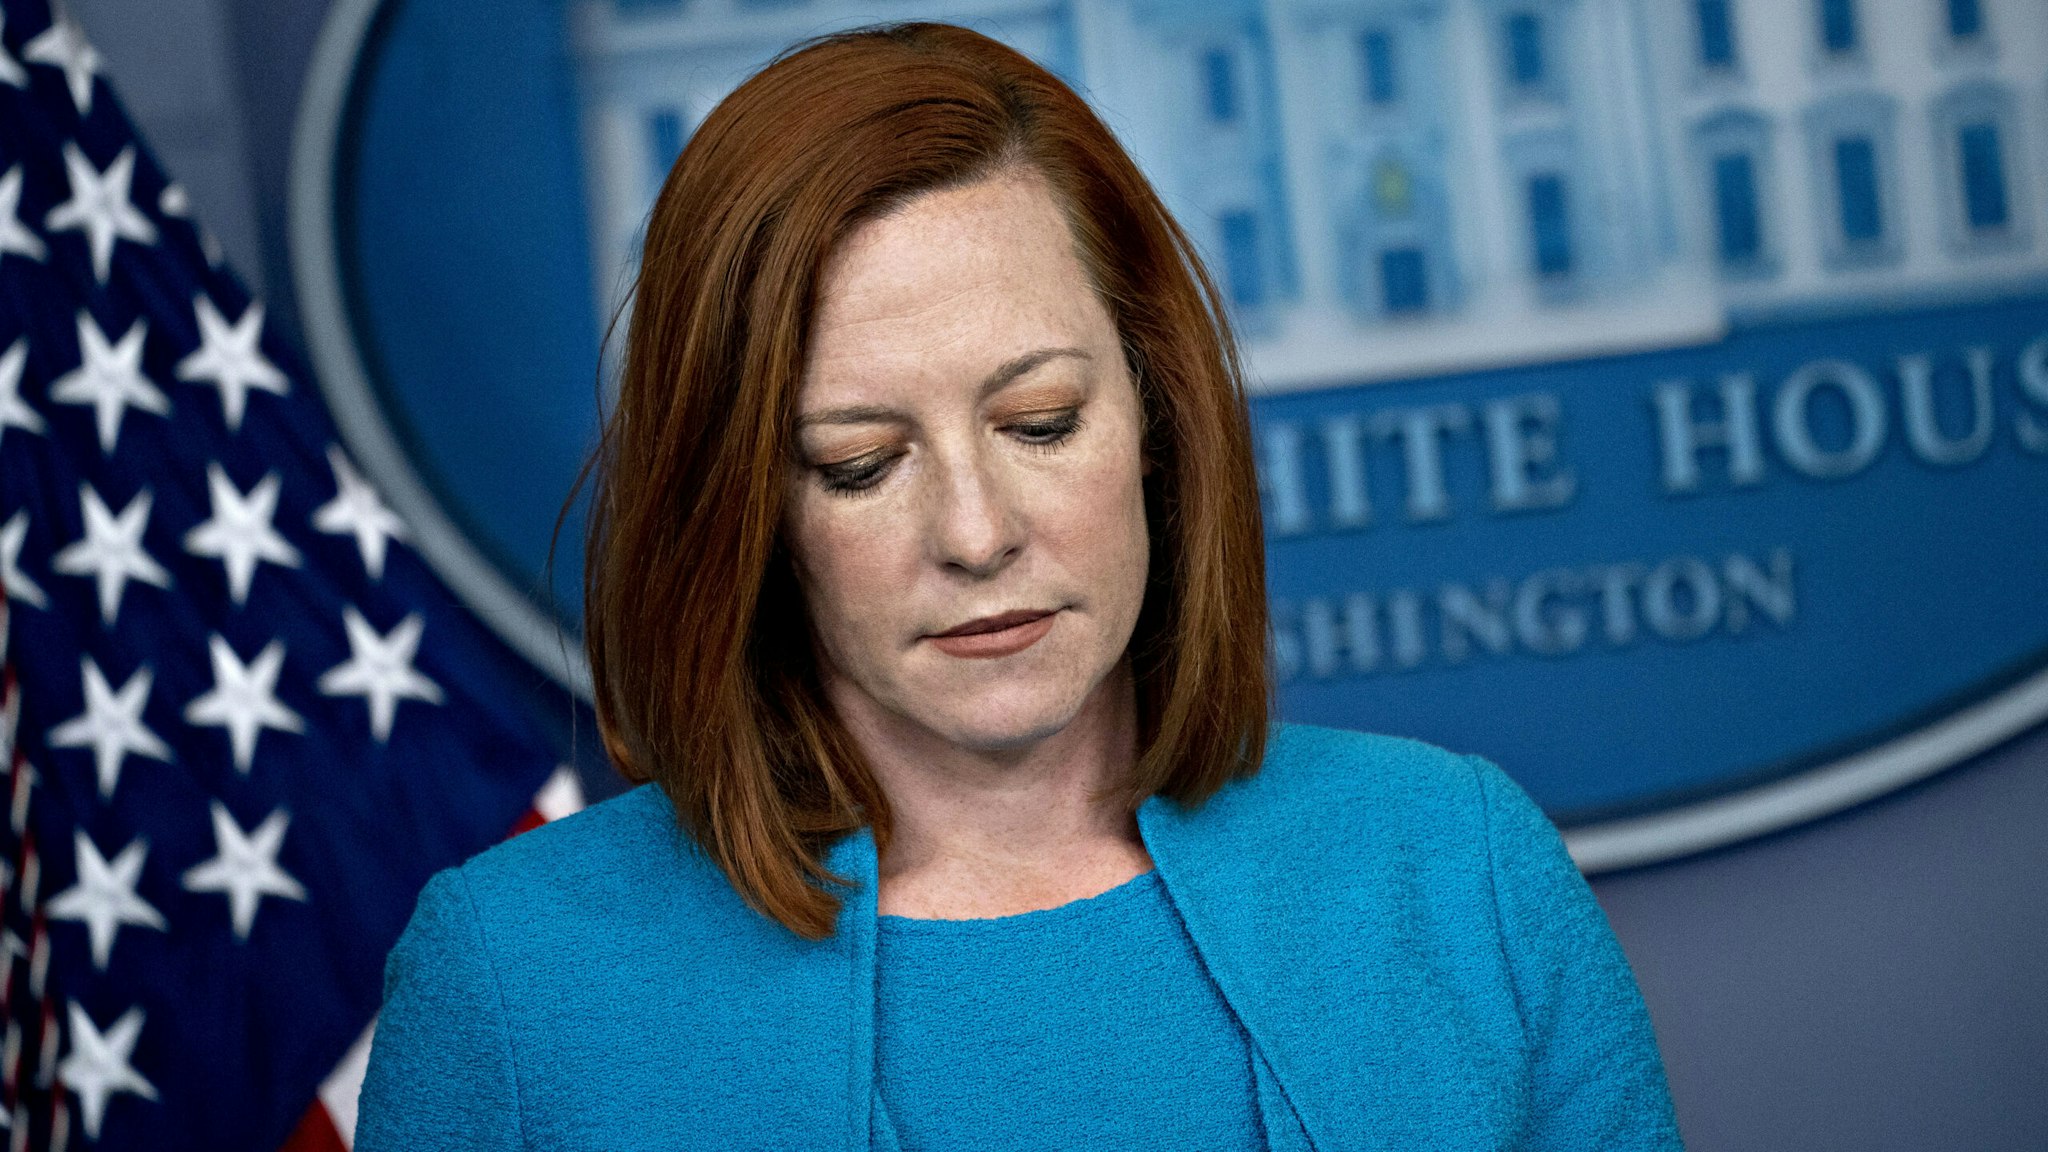 Jen Psaki, White House press secretary, pauses during a news conference in the James S. Brady Press Briefing Room at the White House in Washington, D.C., U.S., on Monday, March 22, 2021.